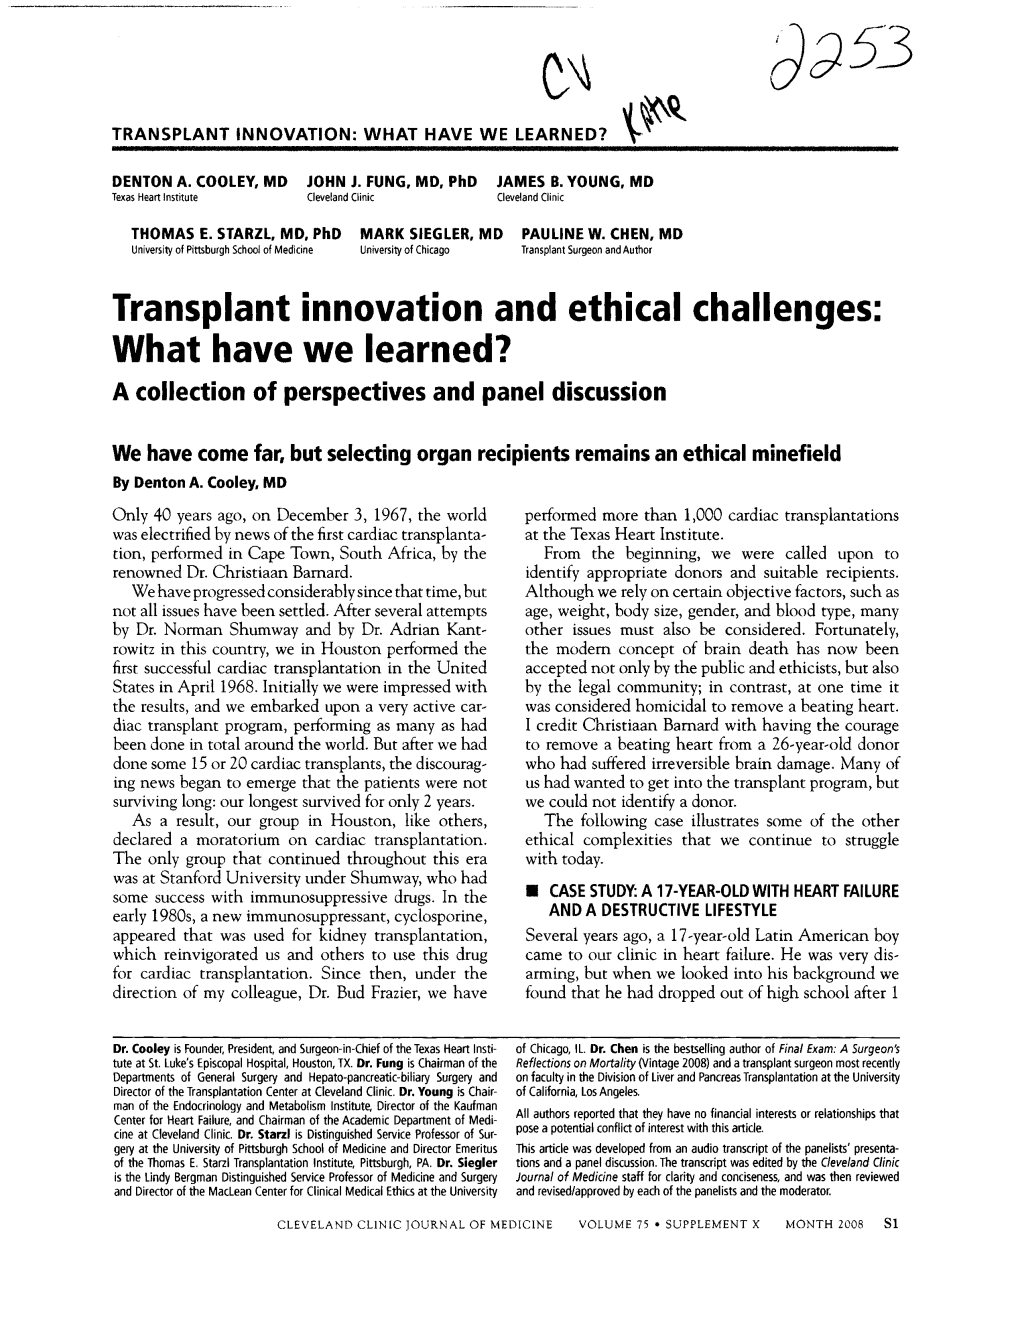 Transplant Innovation and Ethical Challenges: What Have We Learned7 a Collection of Perspectives and Panel Discussion